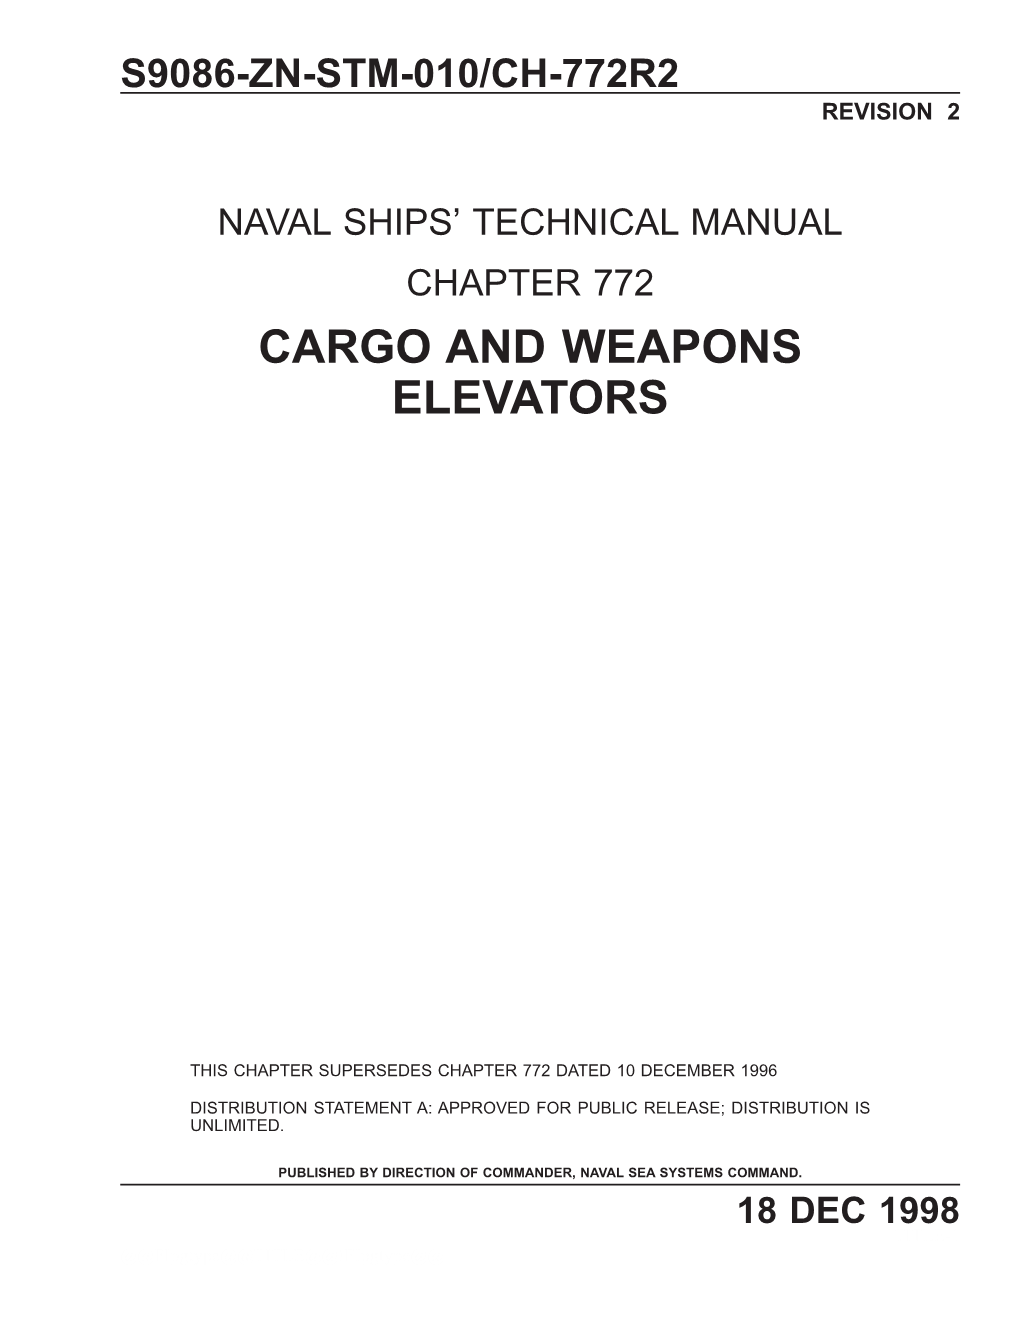 Chapter 772 Cargo and Weapons Elevators